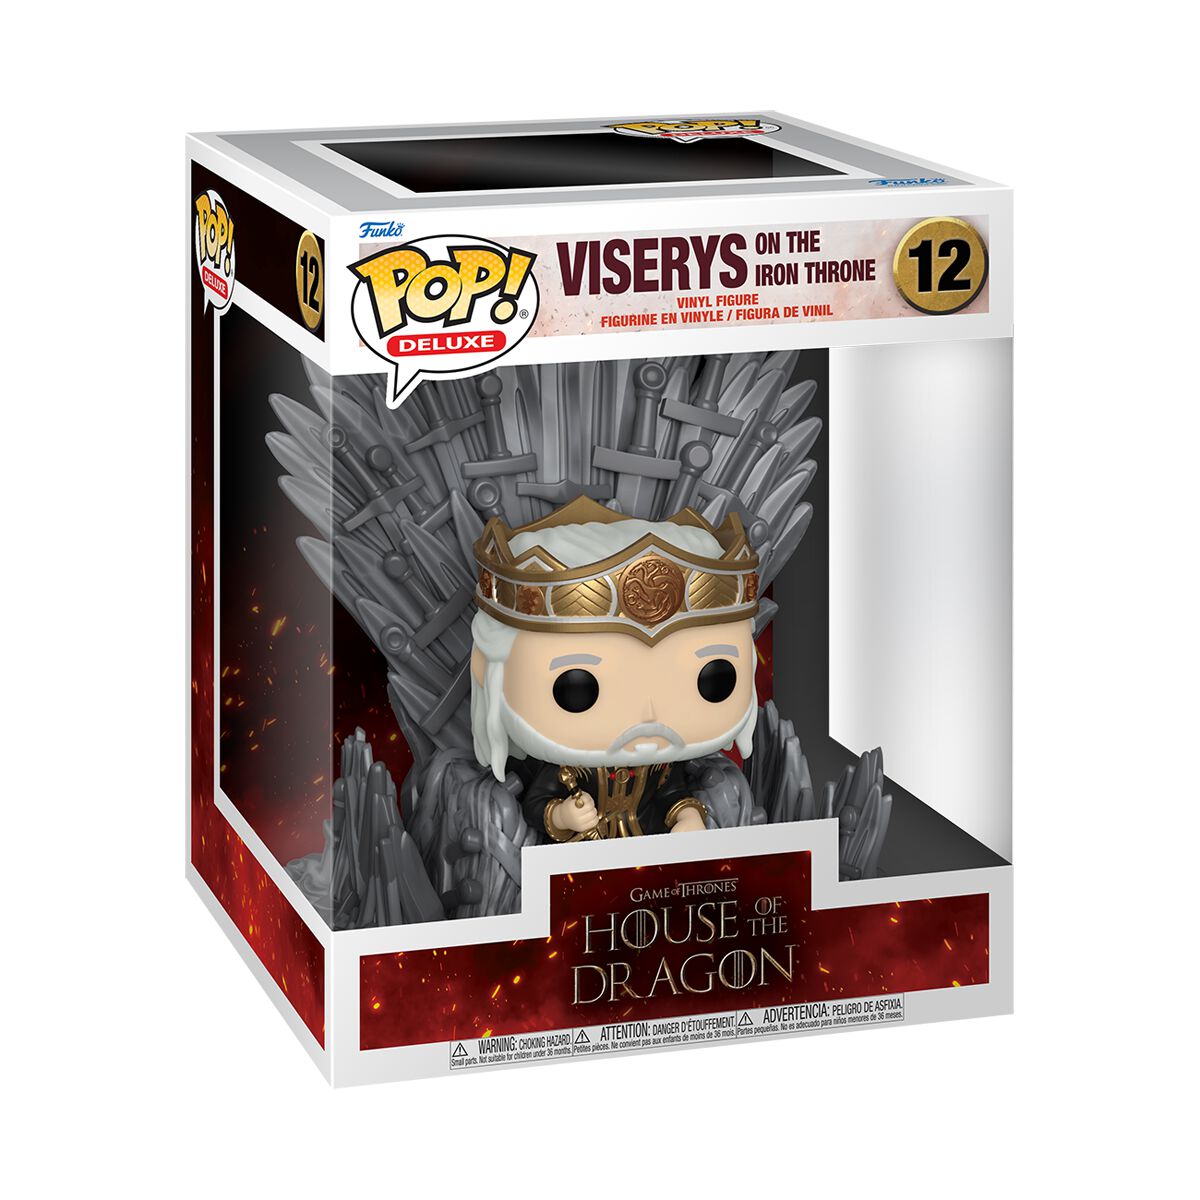 House Of The Dragon Viserys on the Iron Throne (Pop! Deluxe) Vinyl Figur 12 Funko Pop! multicolor